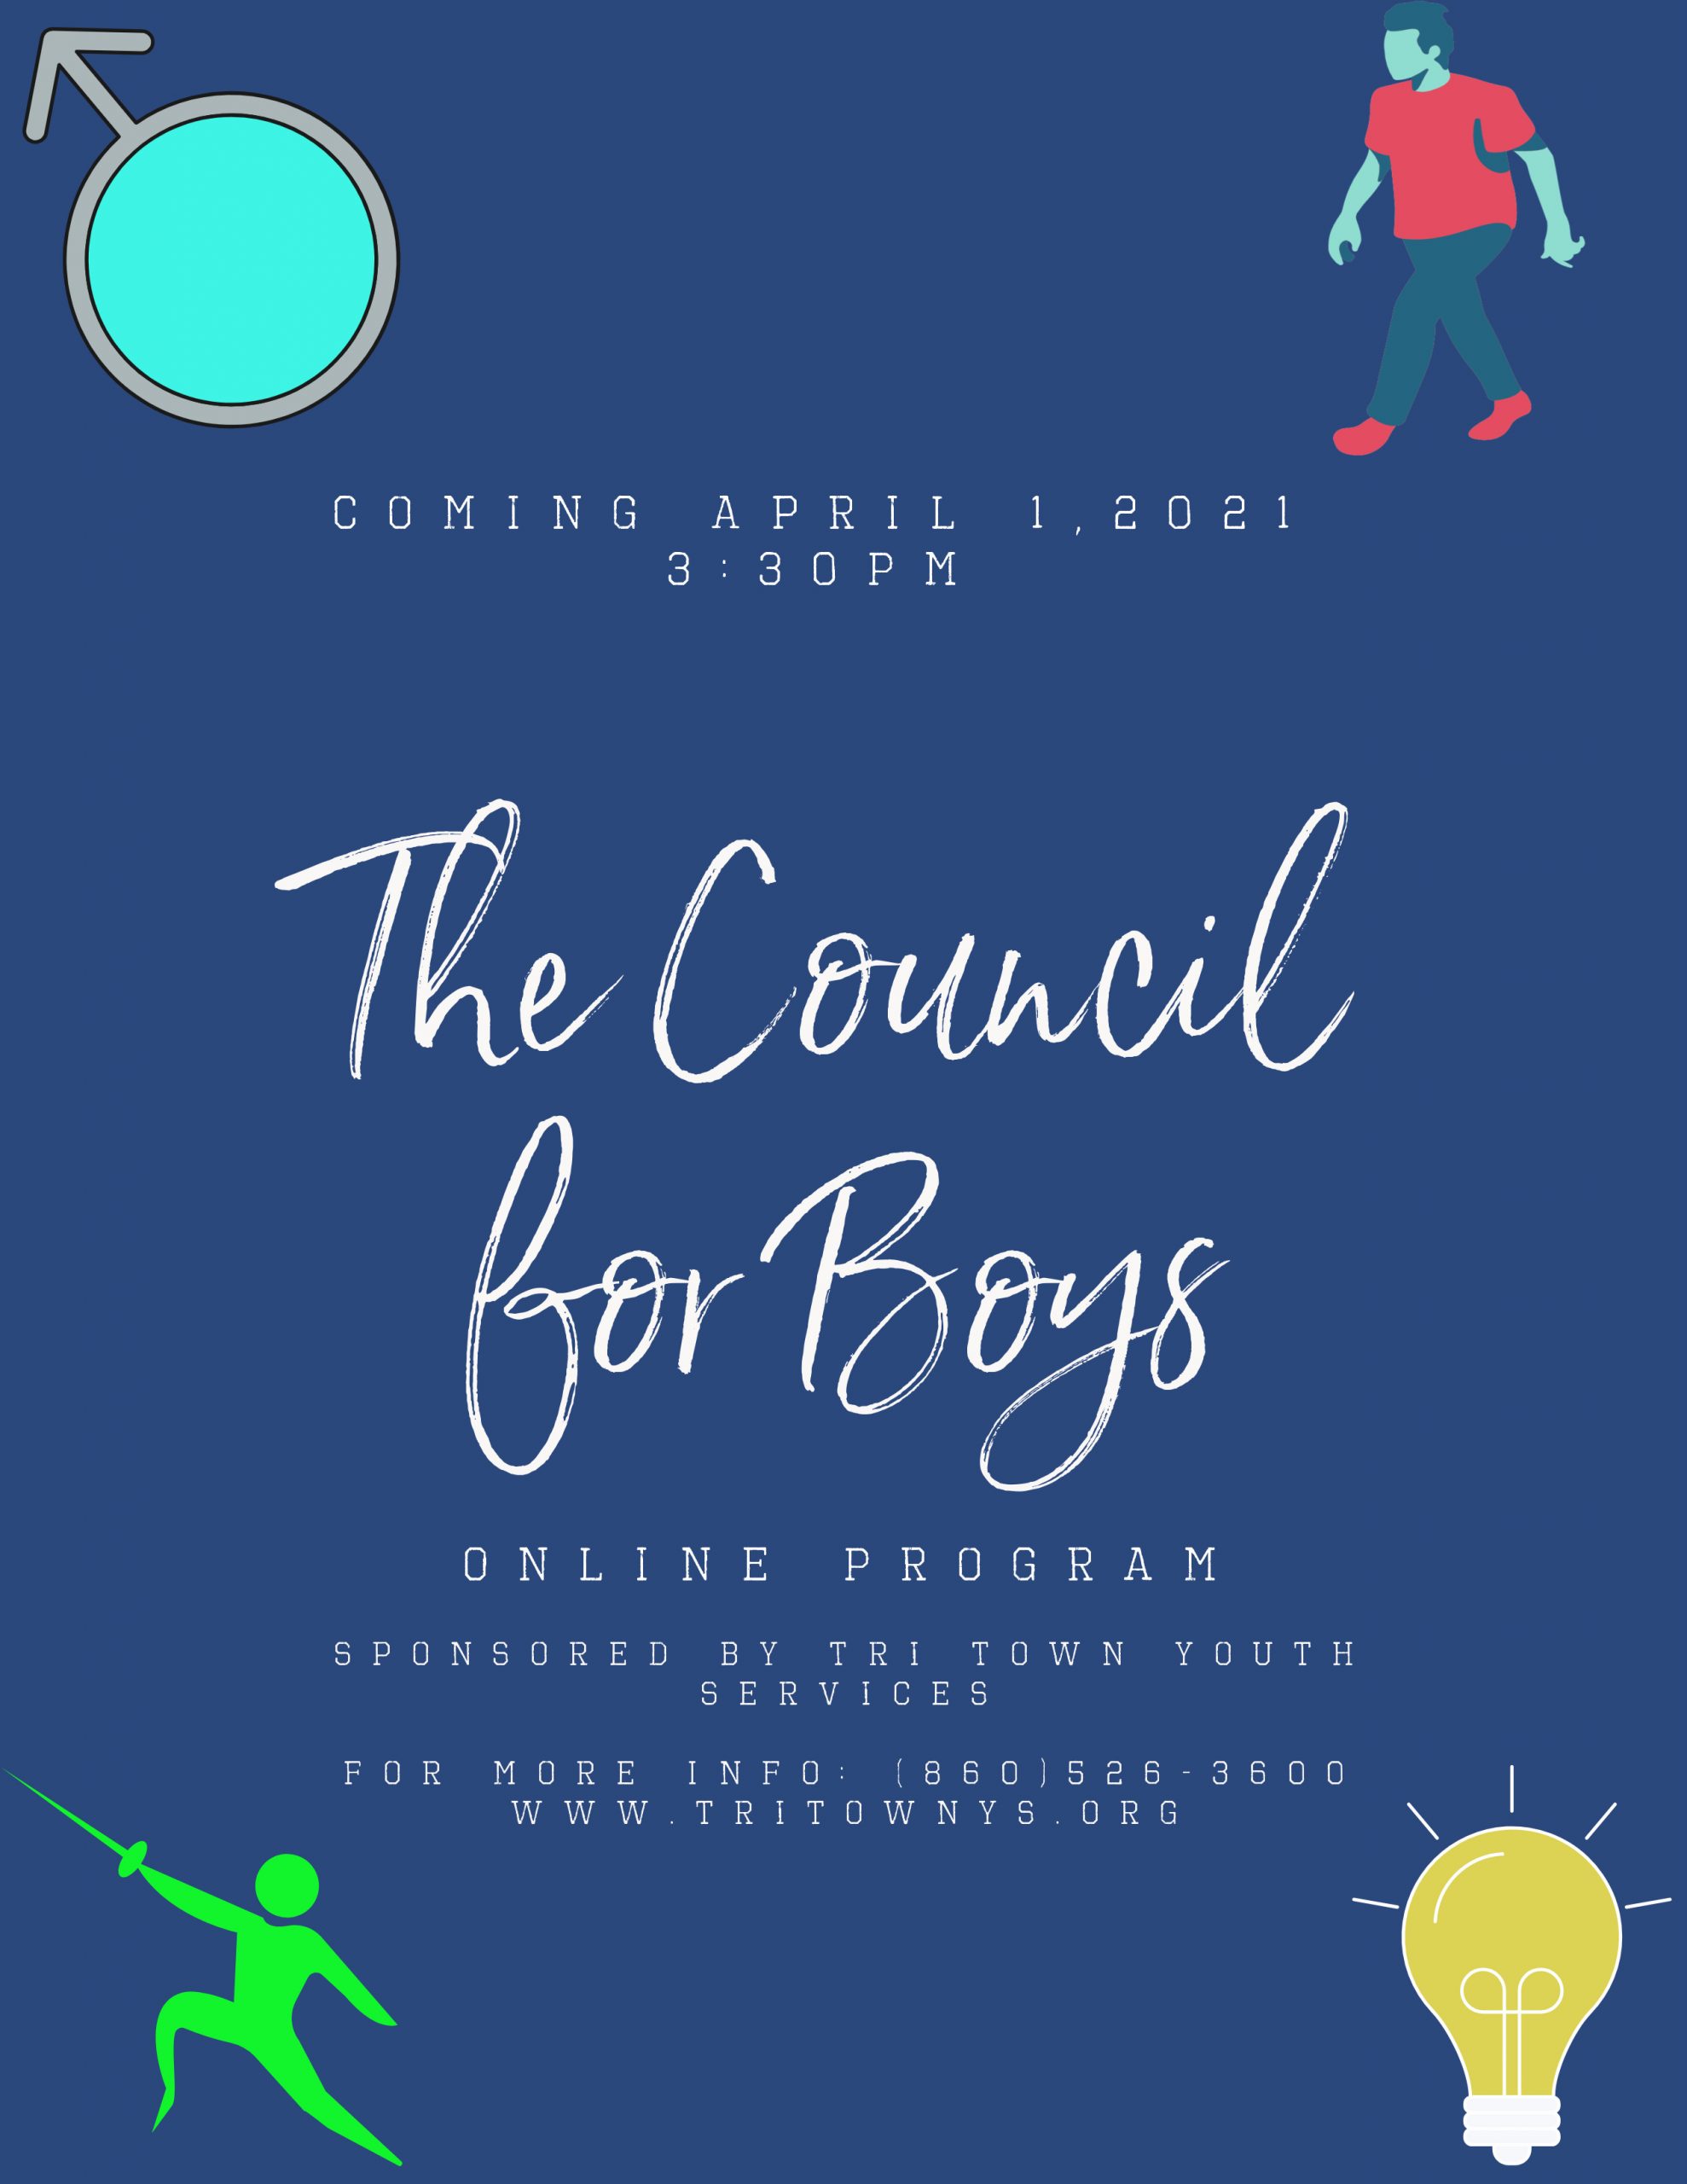 The Council for Boys 